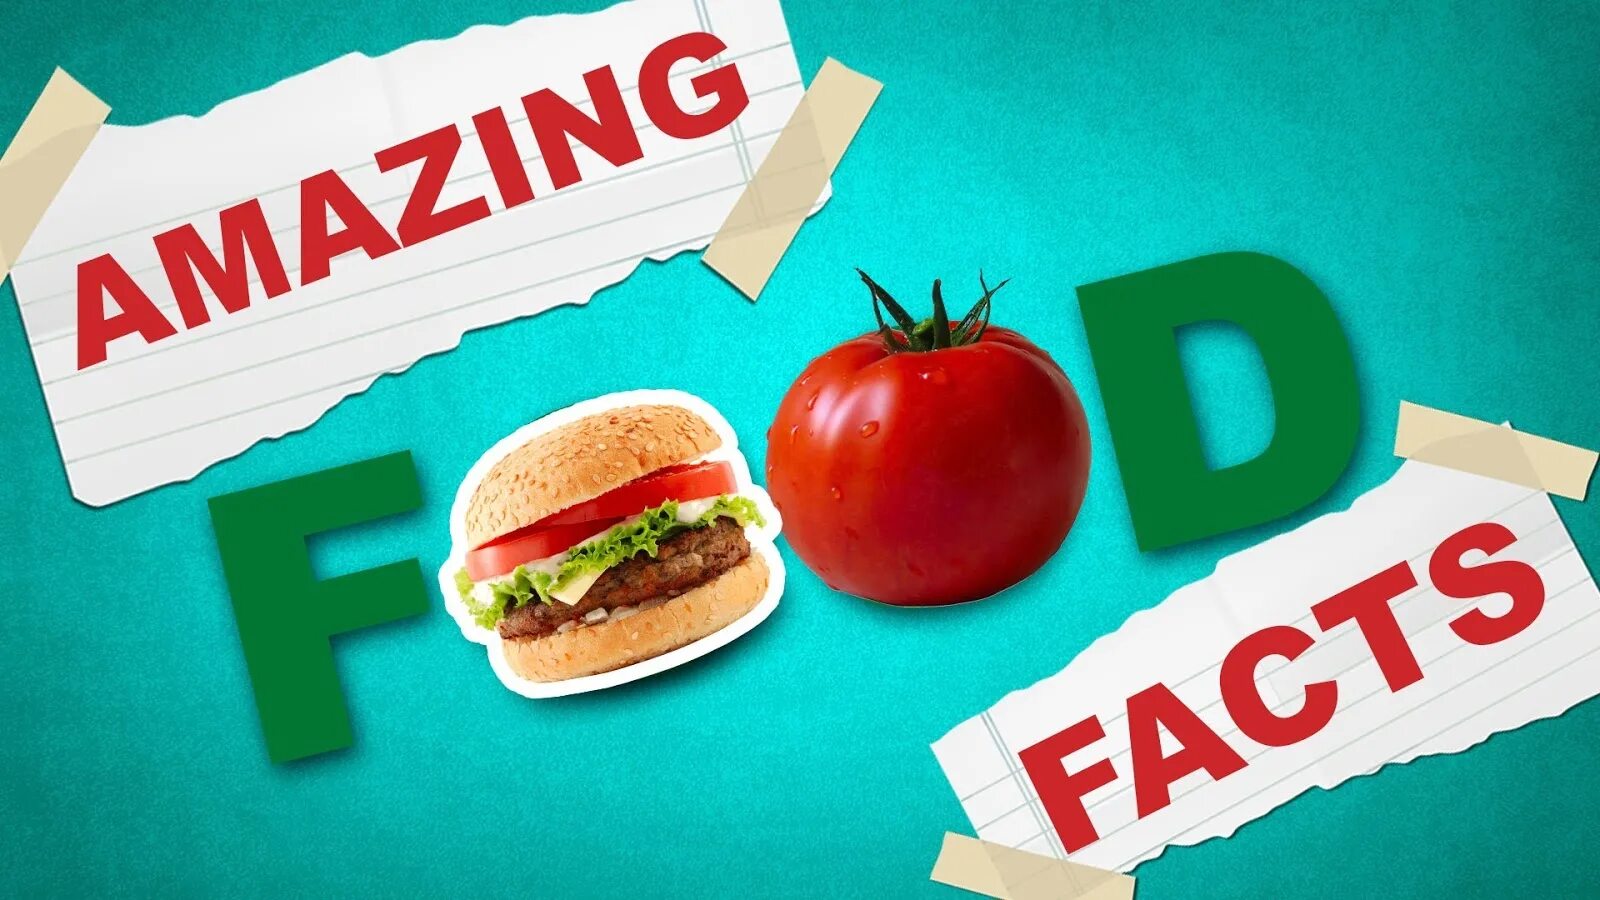 Facts about food. Interesting facts about food. Пицца бургер. Food картинки для детей. Факт фуд